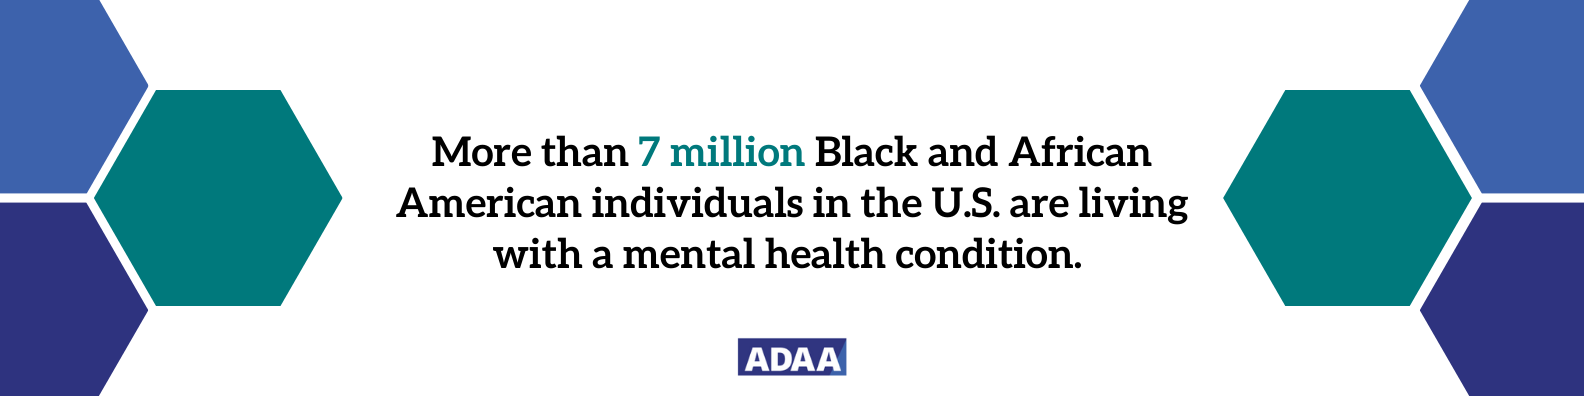 "Black and African American mental health condition"